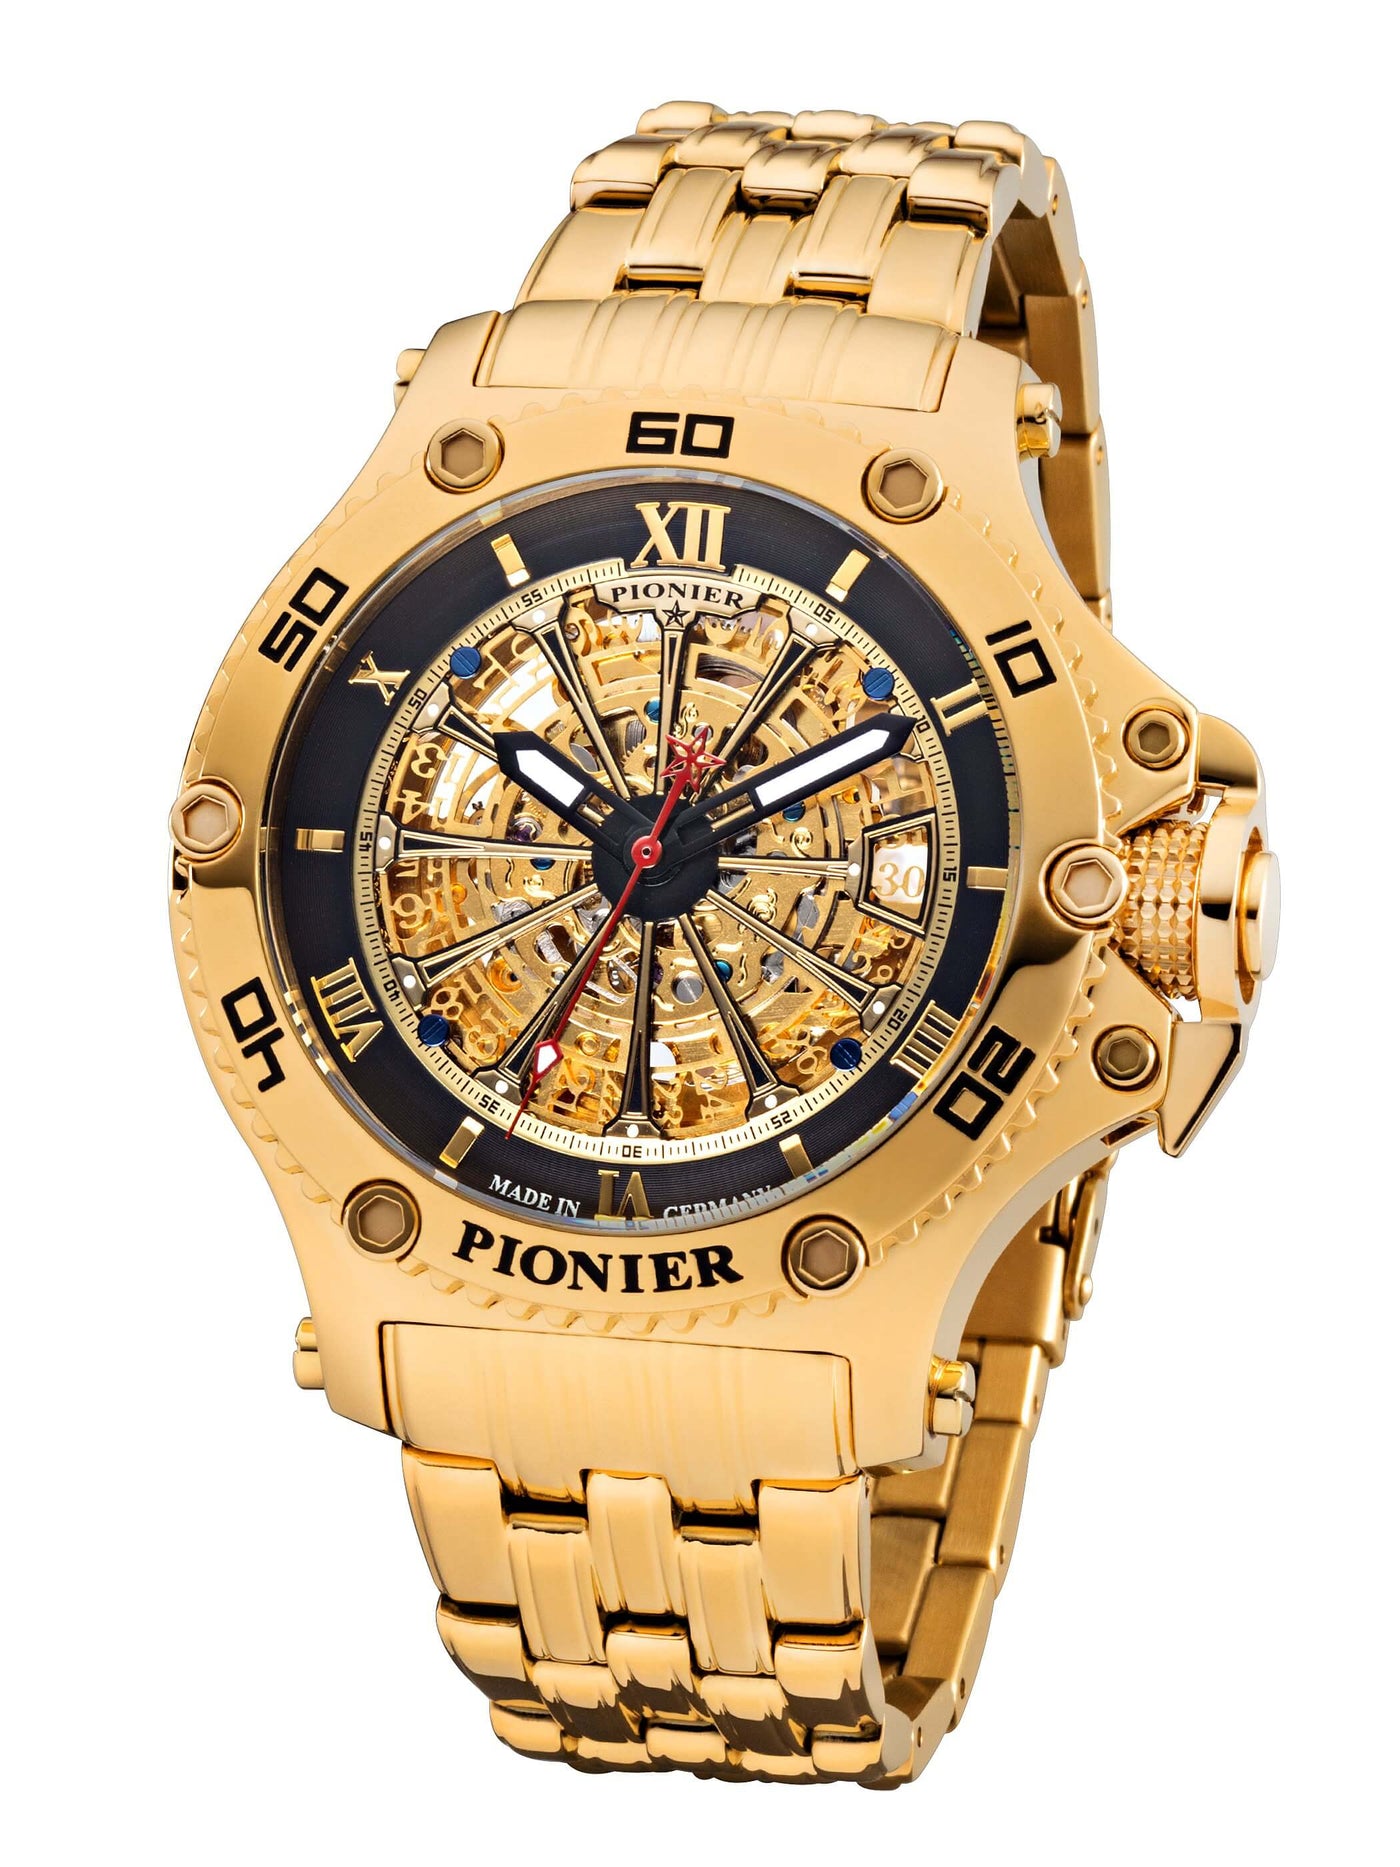 Barcelona Pionier GM-516-10 | Gold | Made in Germany